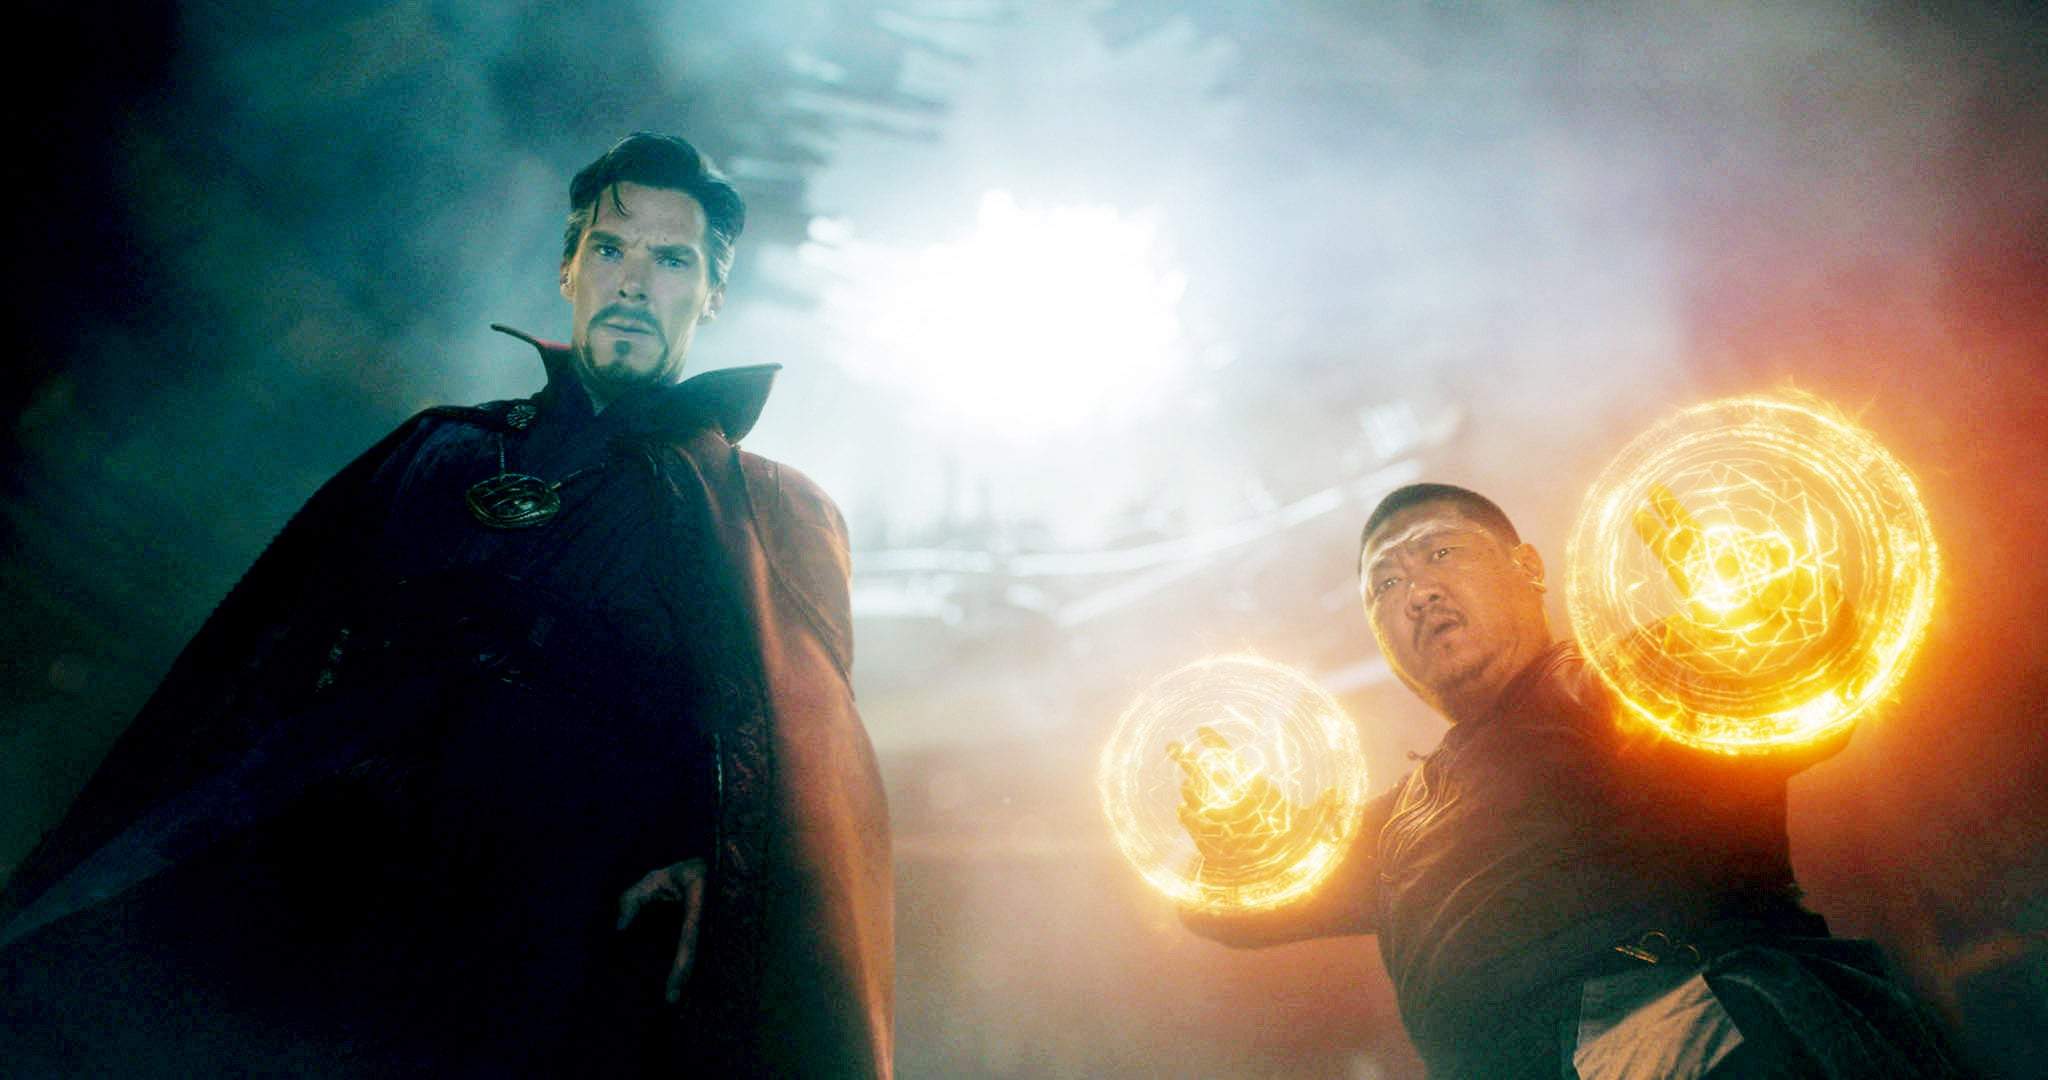 AVENGERS: INFINITY WAR, from left, Benedict Cumberbatch (as Dr. Strange), Benedict Wong (as Wong), 2018. Marvel/Walt Disney Studios Motion Pictures/courtesy Everett Collection